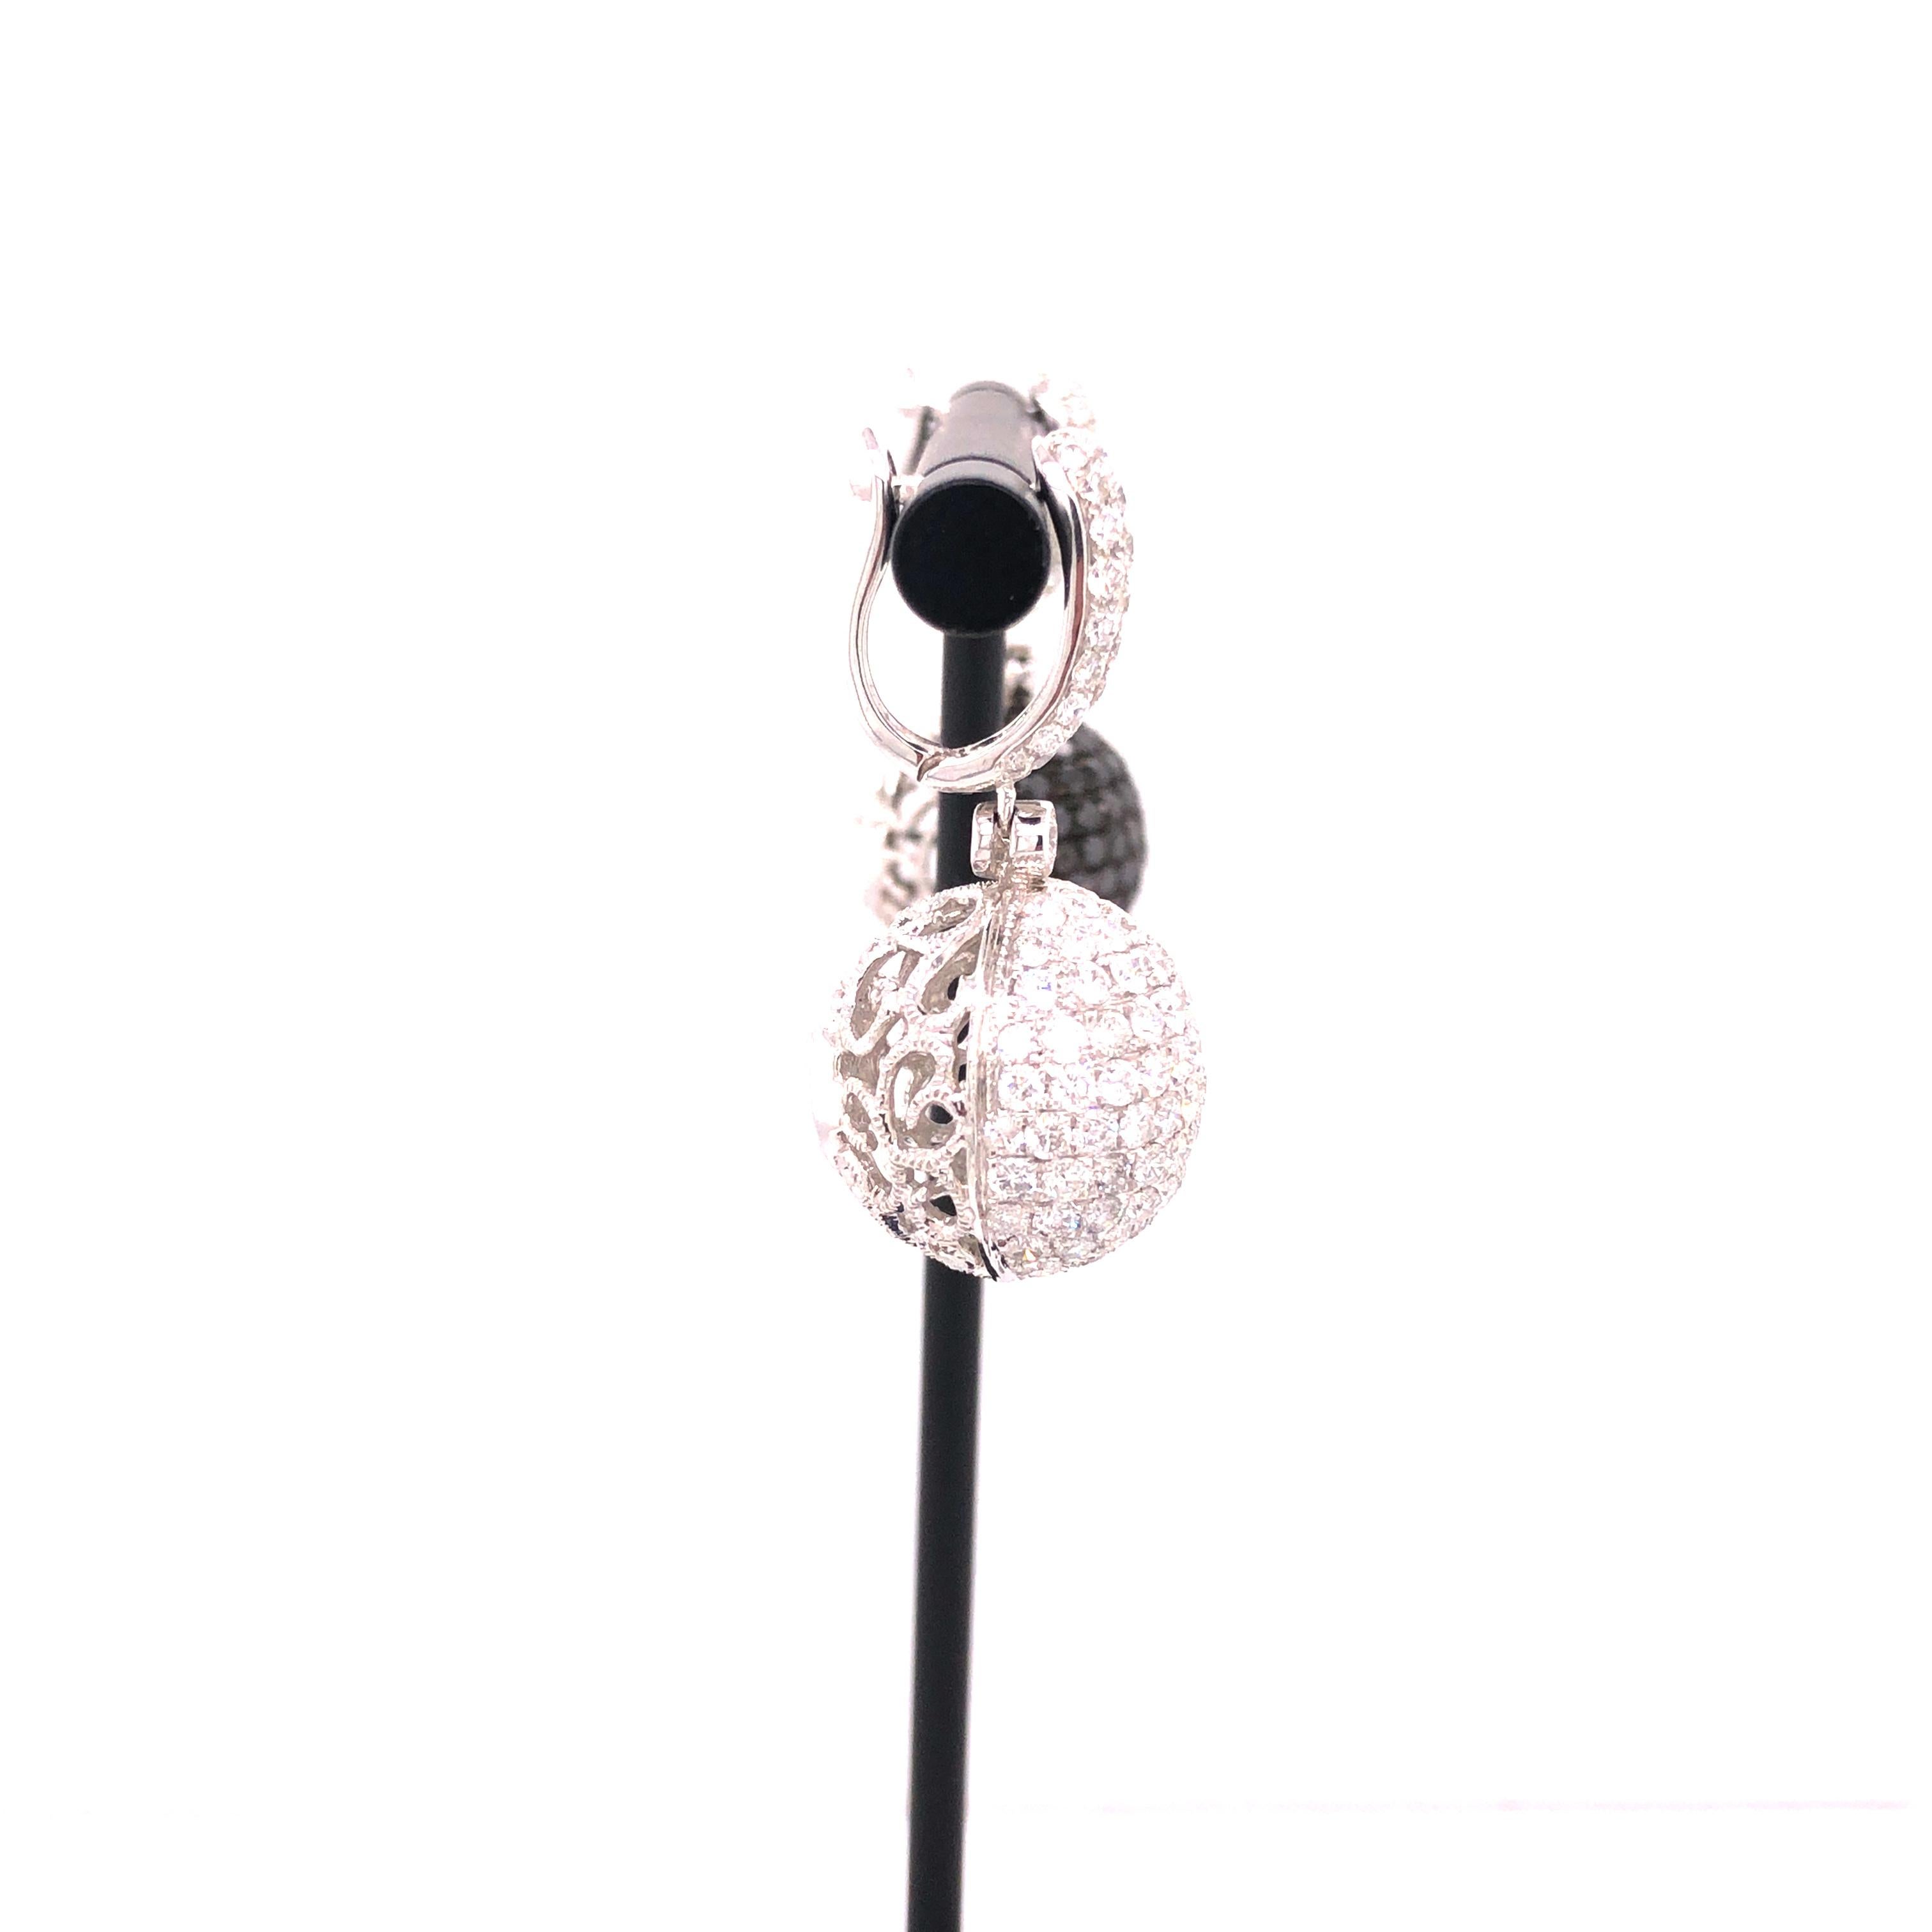 A pair of ball dangle earrings featuring round-cut diamonds weighing a total of 3.31 carats, and round-cut black diamonds weighing a total 2.27 carats, all set in 18K white gold.